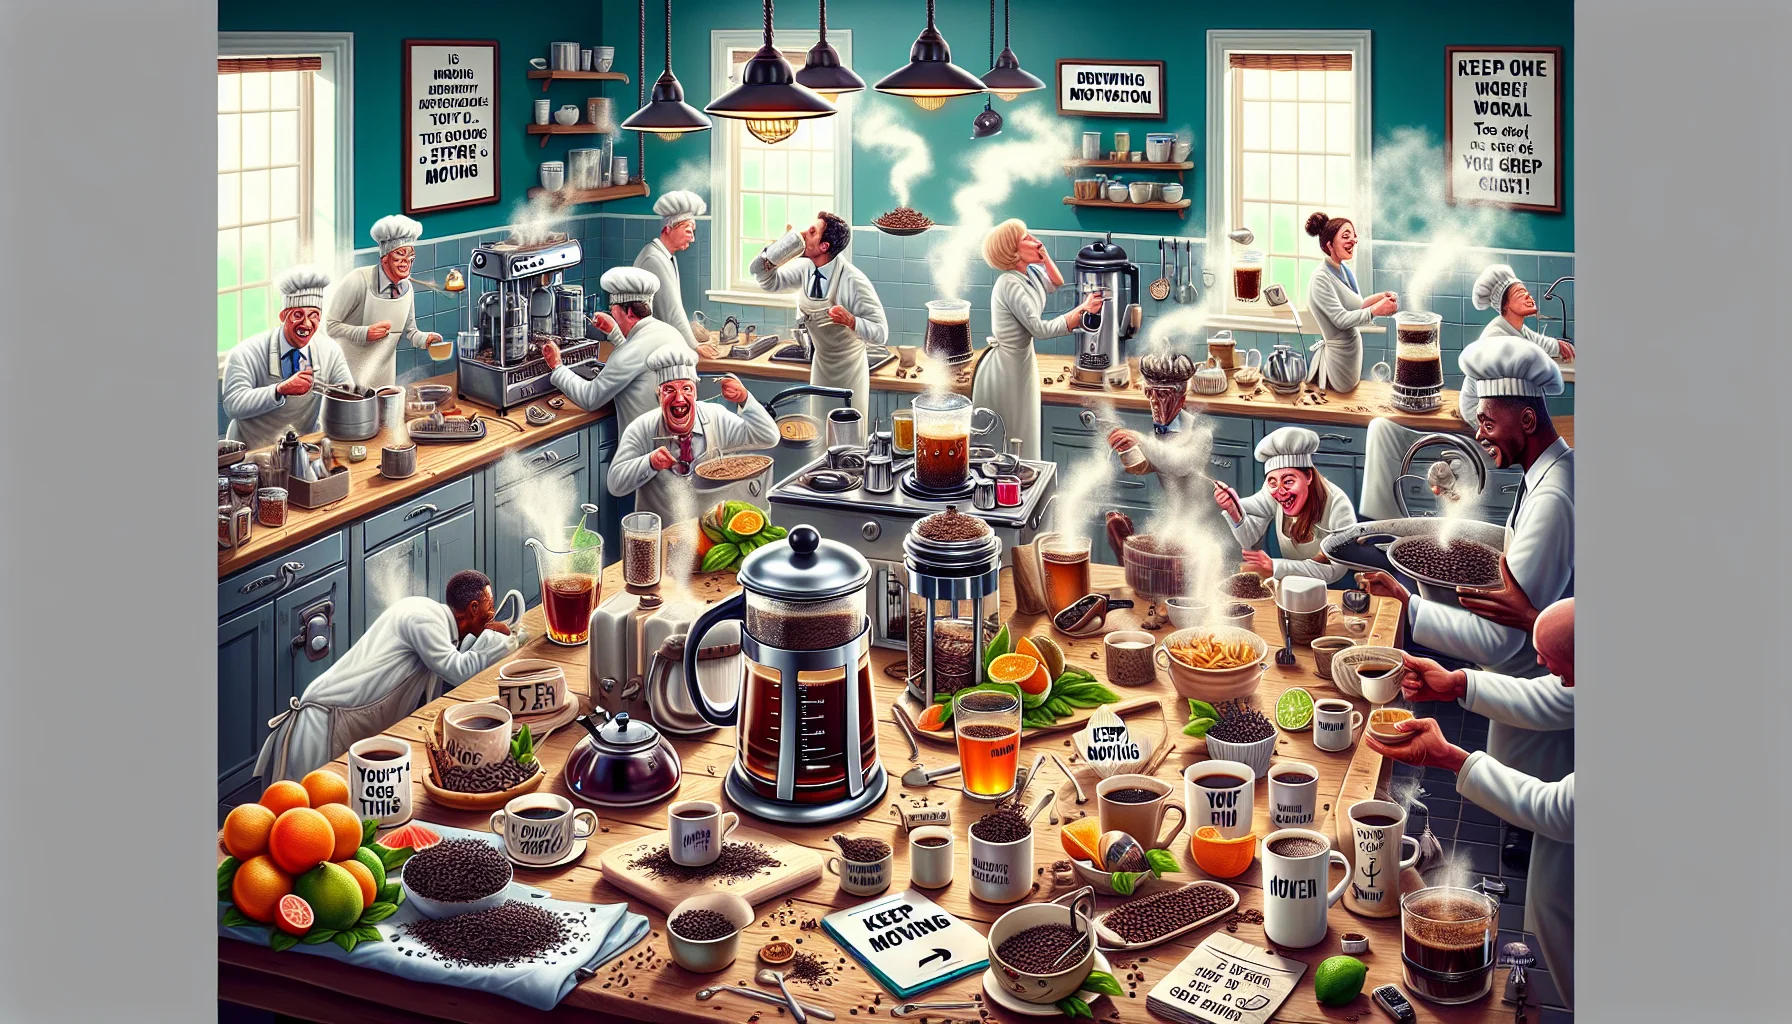 Create a humorous scene revolving around the concept of 'Brewing Motivation, Keep Moving'. Picture a busy kitchen filled with all kinds of tea and coffee brewing equipment: a kettle boiling vigorously, a French press coffee maker freshly filled, bags of premium tea leaves and exotic coffee beans scattered around. There are numerous mugs of different shapes and sizes, filled to the brim with delicious hot drinks. Imagine steam rising from the mugs, taking the shape of motivational quotes like 'Keep Going', 'You've Got This' and so on. People from different descents and genders are there, laughing and sipping from their mugs while preparing more beverages. The enticing aroma fills the air, creating a lively atmosphere.